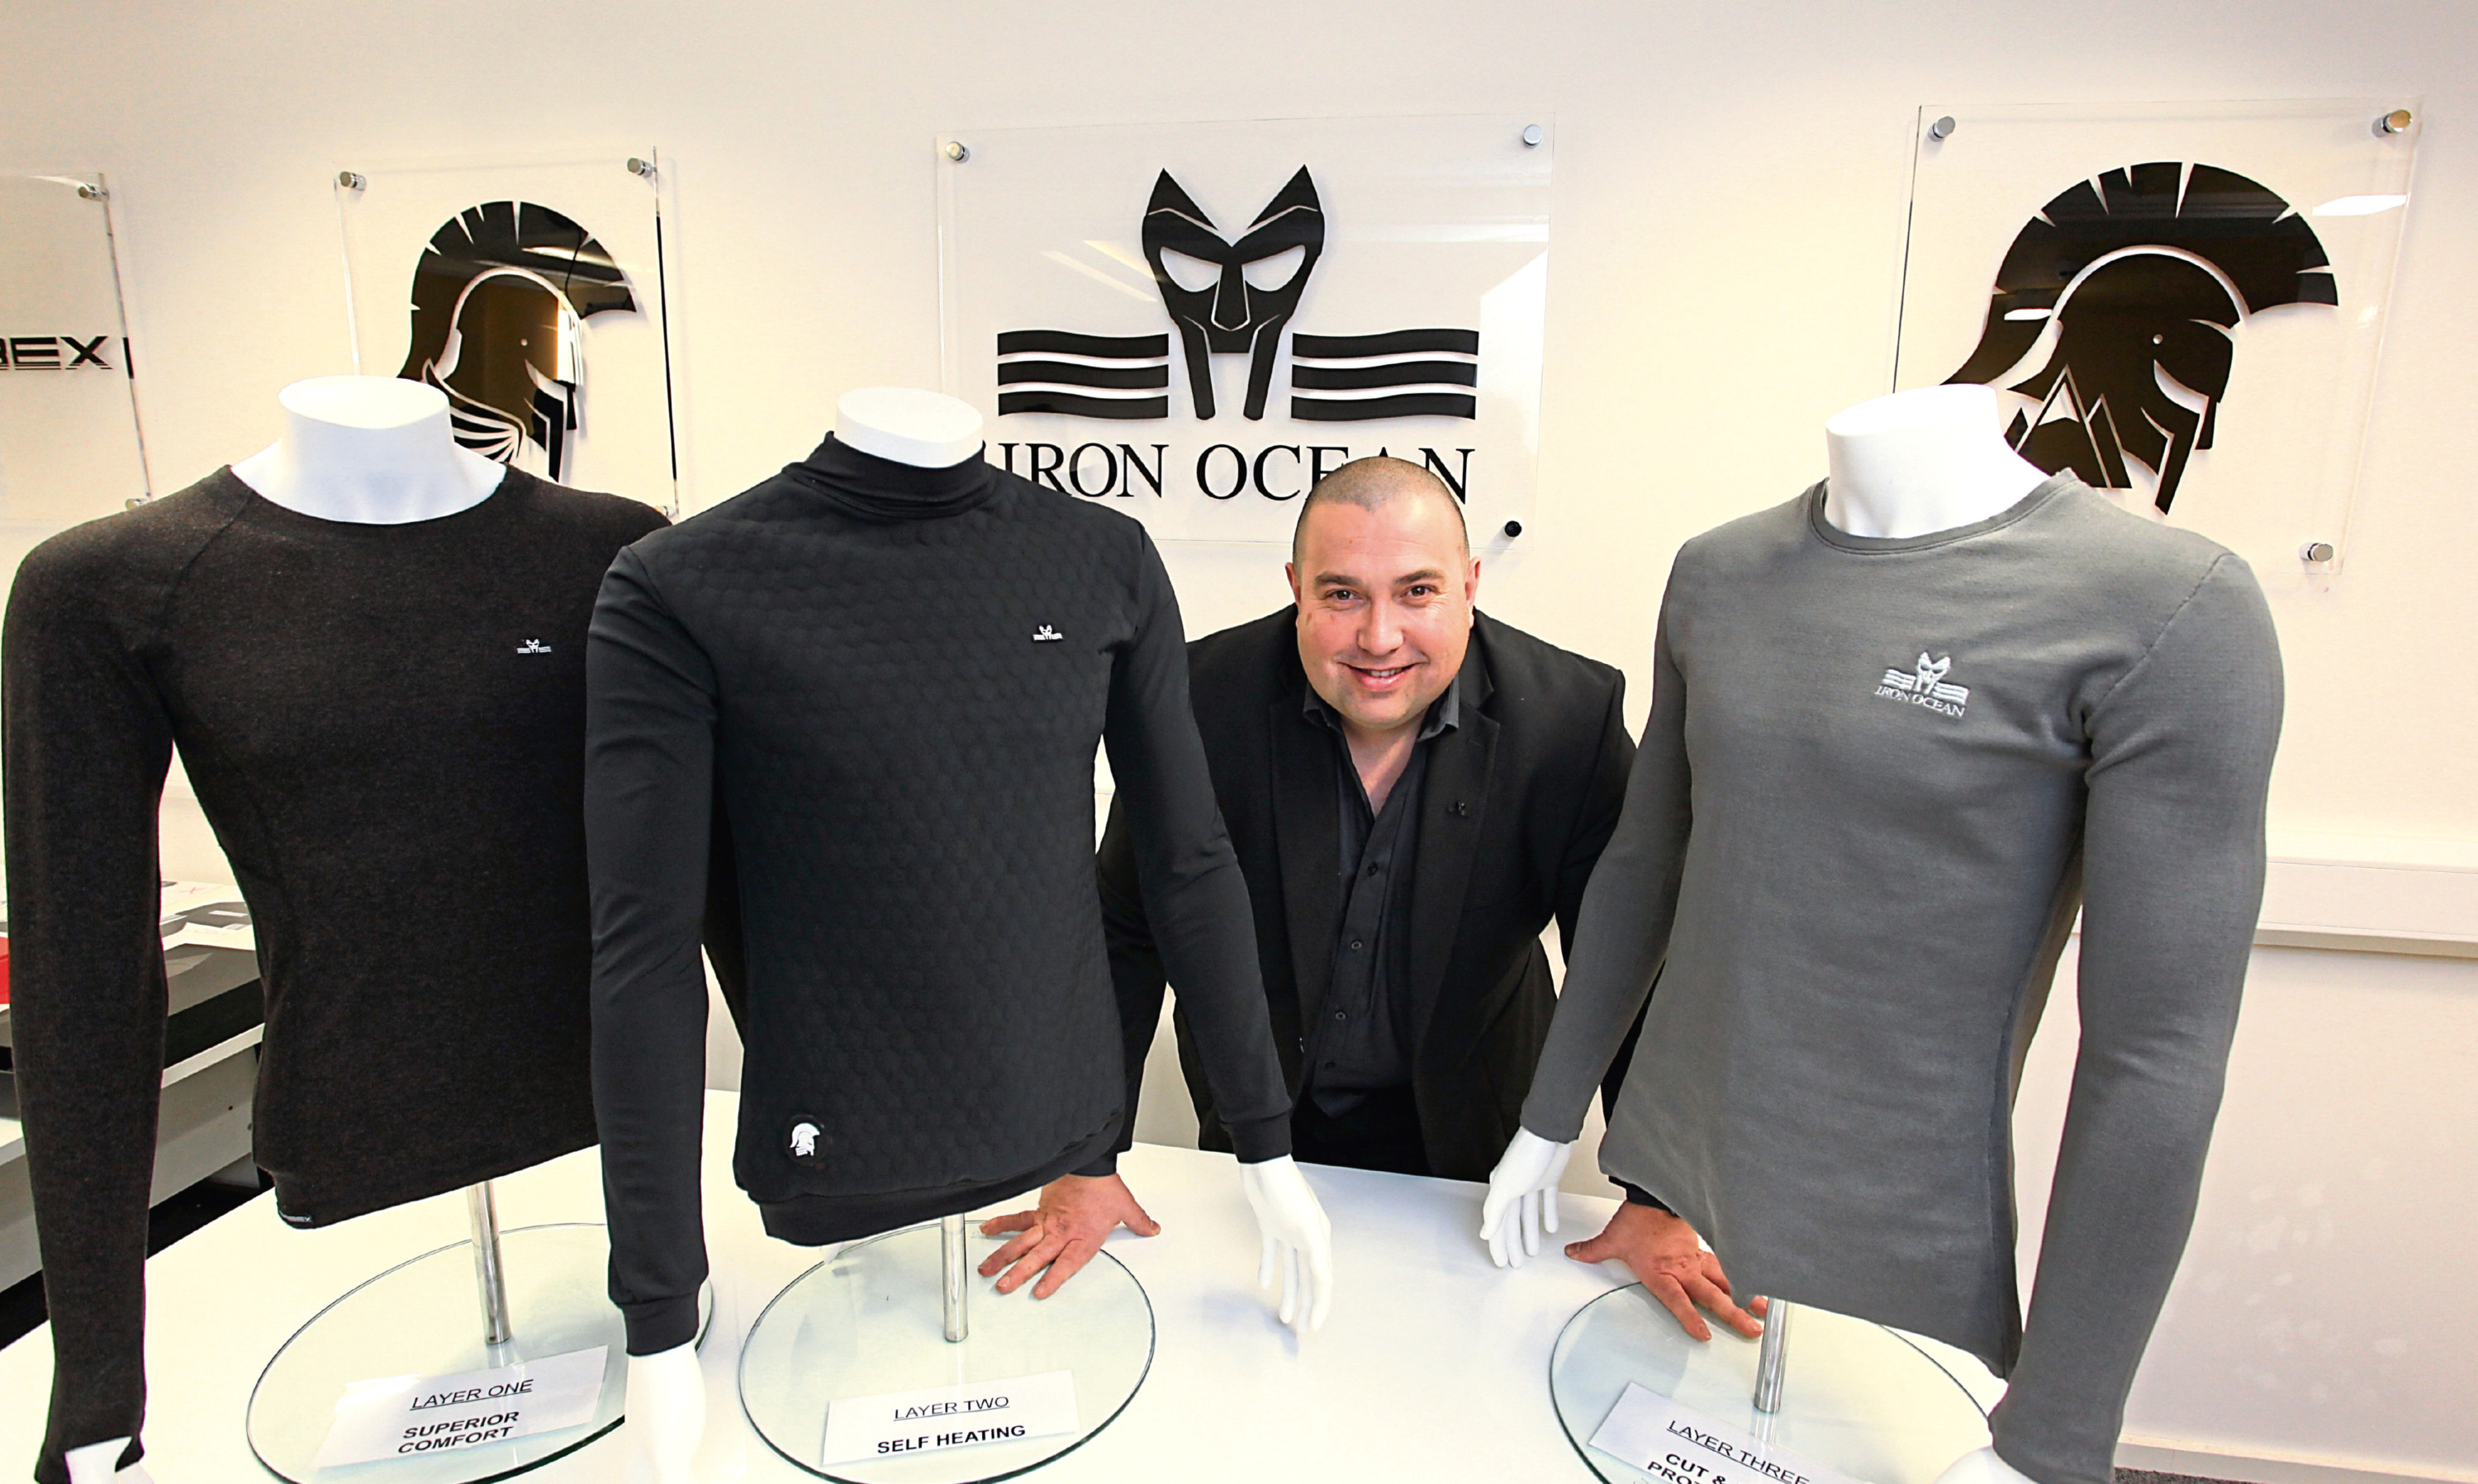 Simon Lamont, founder of Iron Ocean with the Centurion 3 offshore survival garments